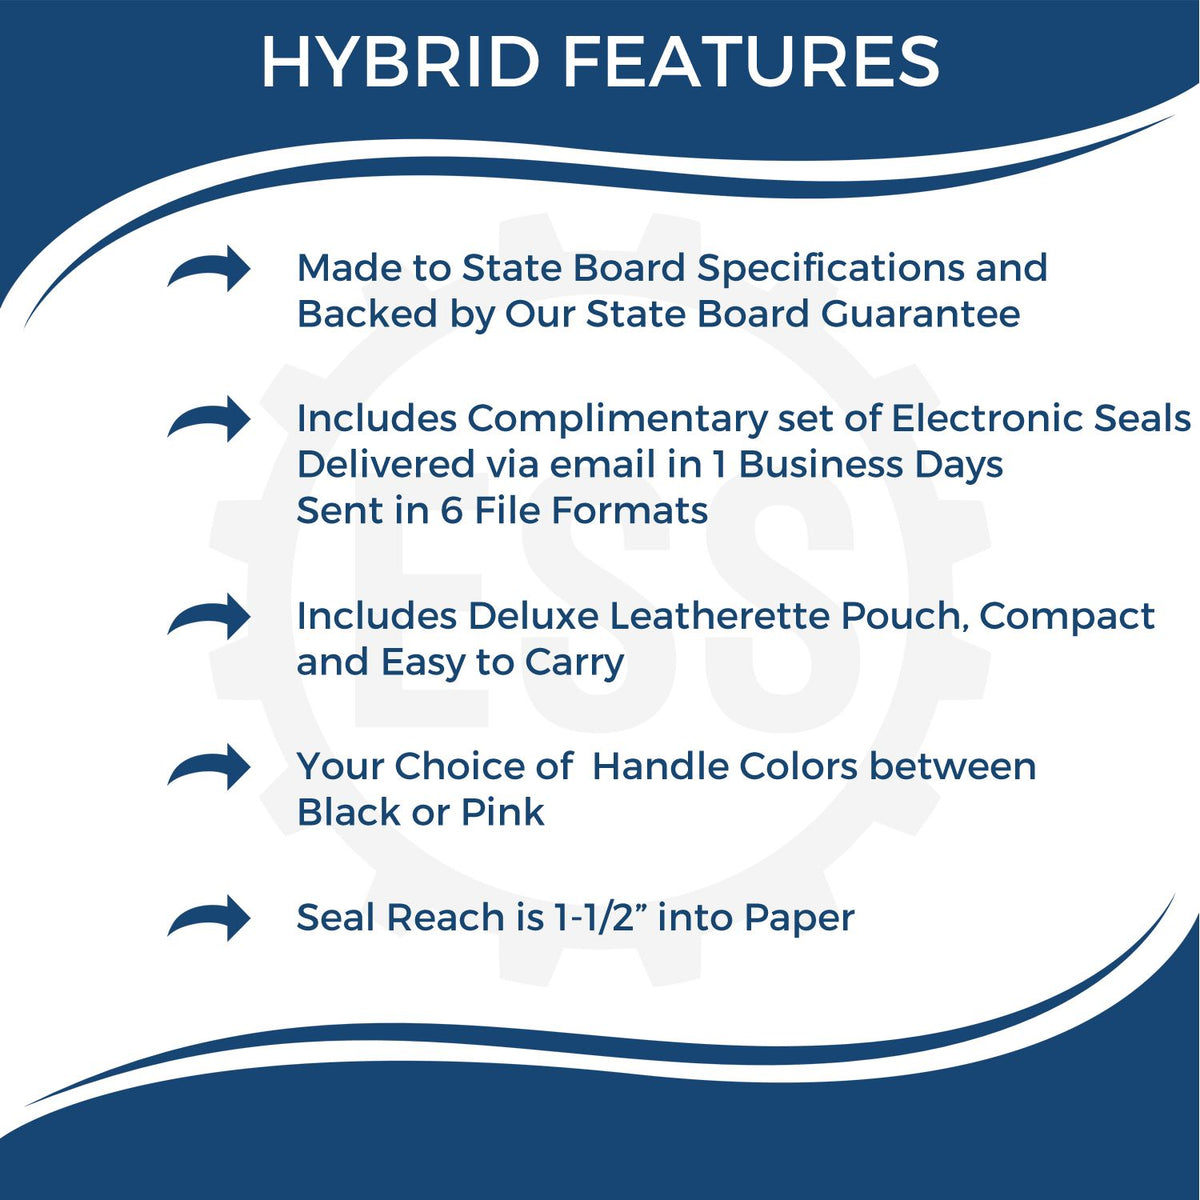 A picture of an infographic highlighting the selling points for the Hybrid Illinois Engineer Seal